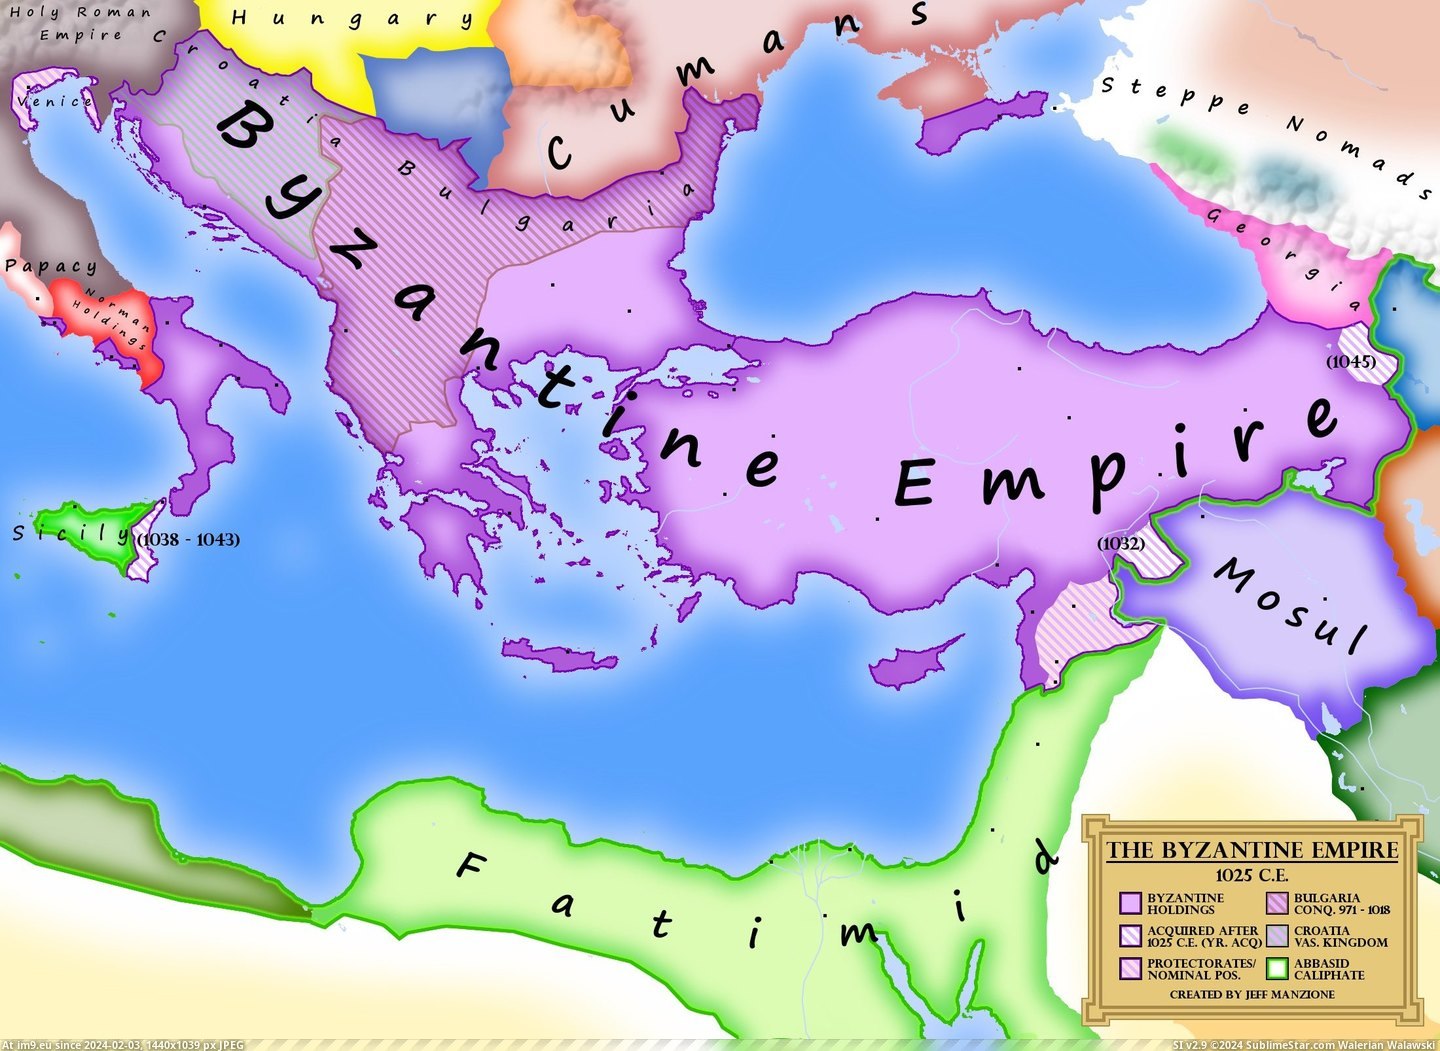 #Empire  #Byzantine [Mapporn] Byzantine Empire at 1025 A.D. made by me [2200x1600] Pic. (Изображение из альбом My r/MAPS favs))